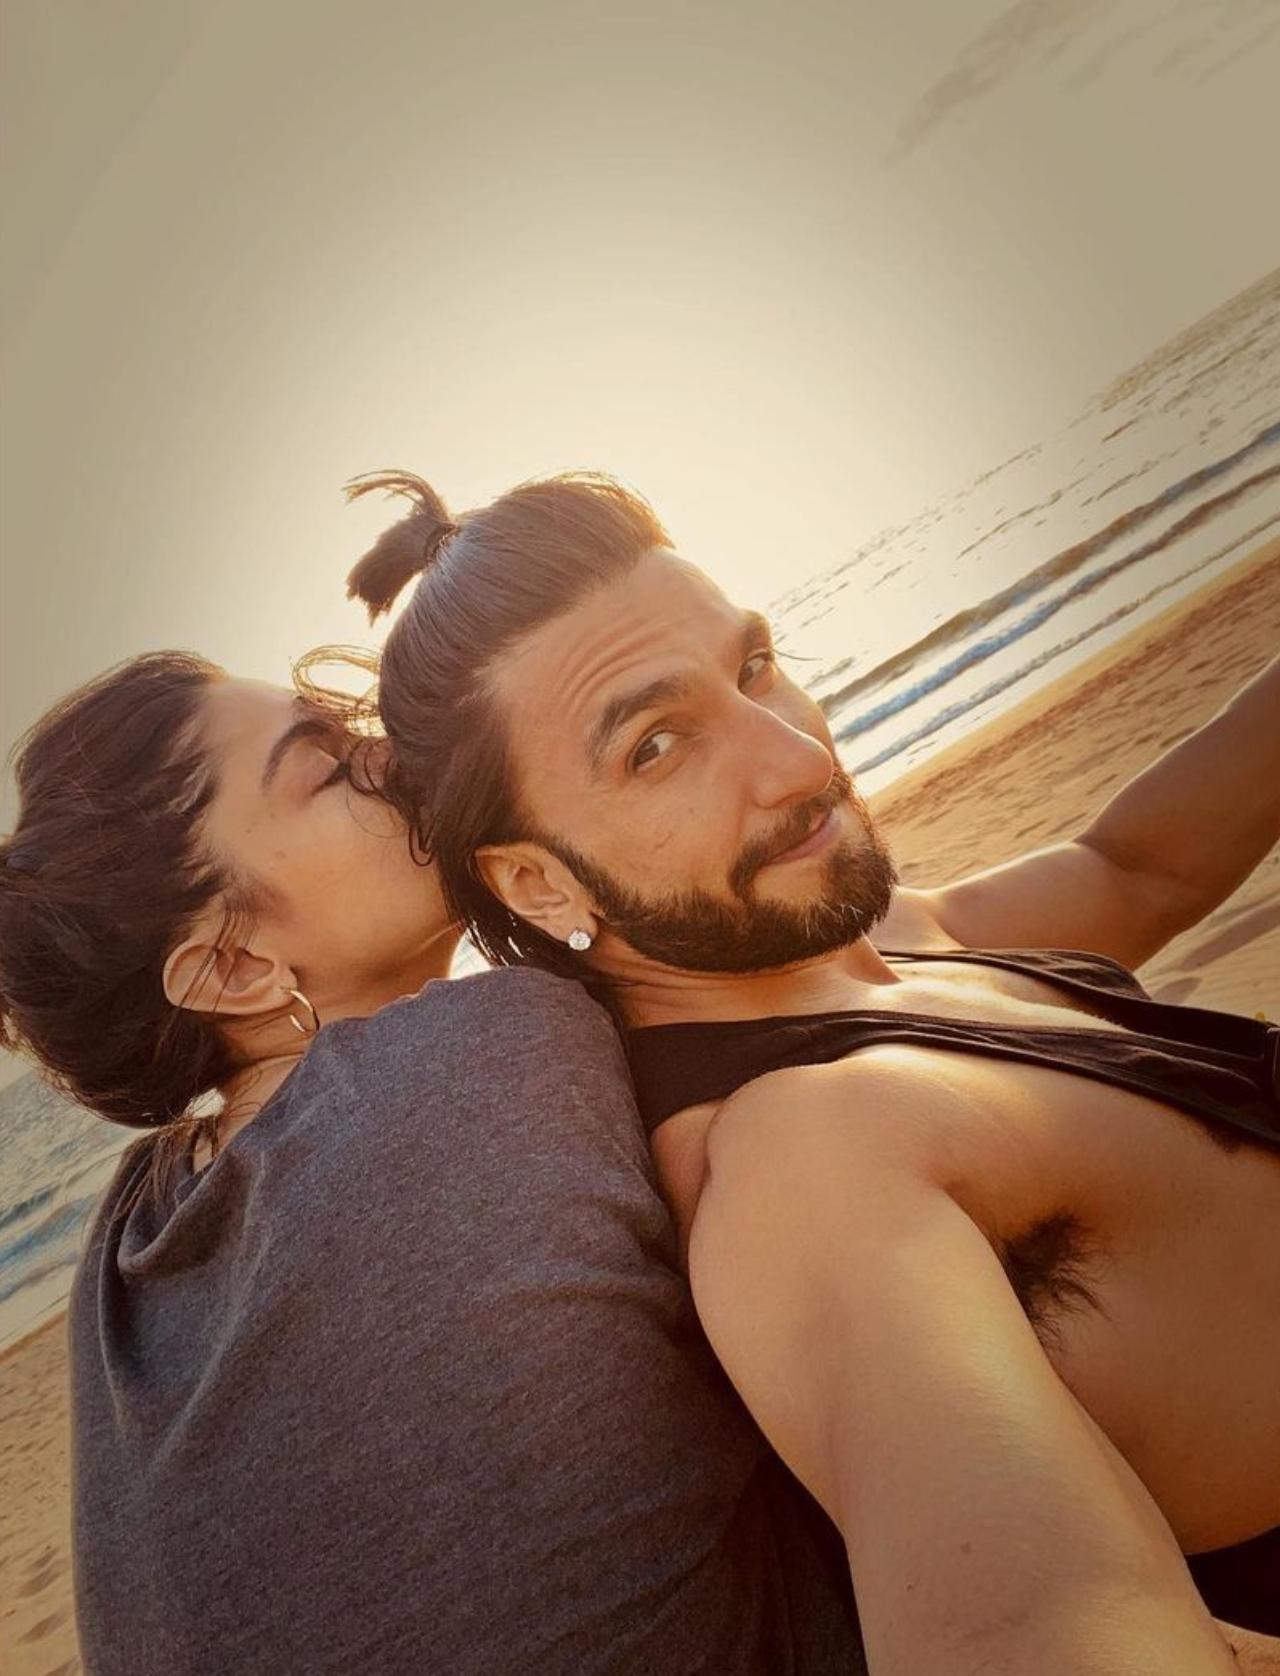 Ranveer Singh and Deepika Padukone are two of the busiest actors of the Hindi film industry. They enjoy a massive fan following and often get mobbed in public places. But the two know how to holiday in style and privately